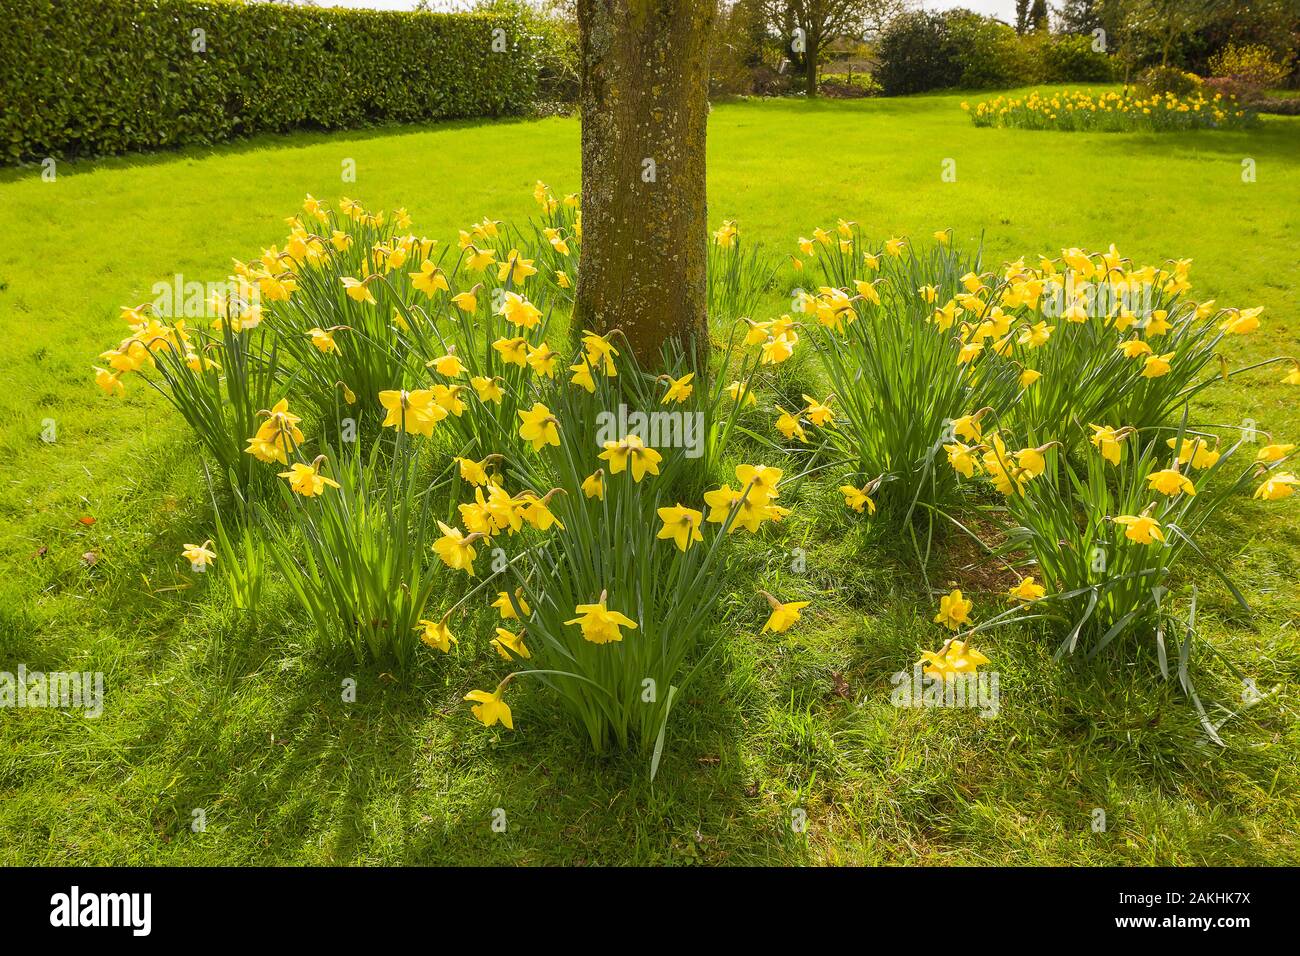 Naturalized daffodils flowering around the bole of a Maple tree in an English garden in March Stock Photo